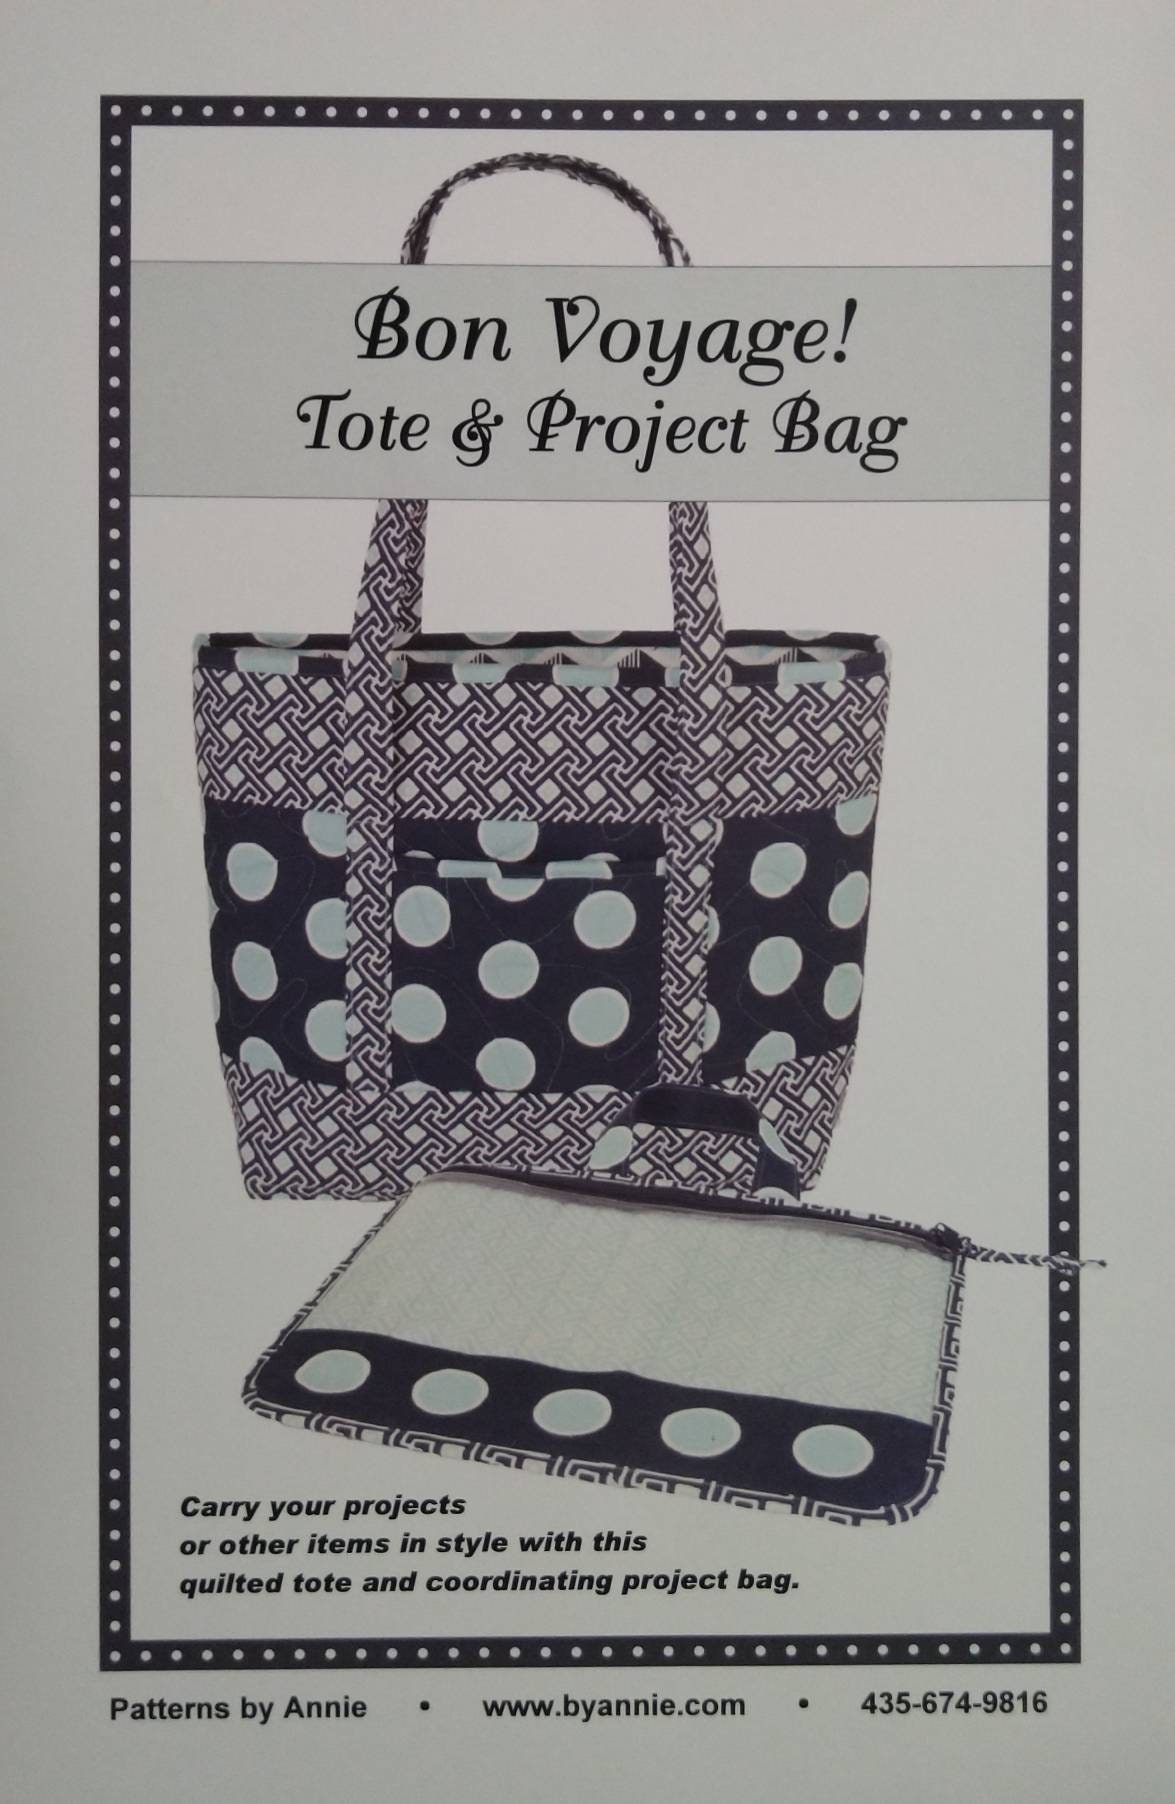 Bon Voyage Tote Bag Pattern and Project Bag Pattern By Annie